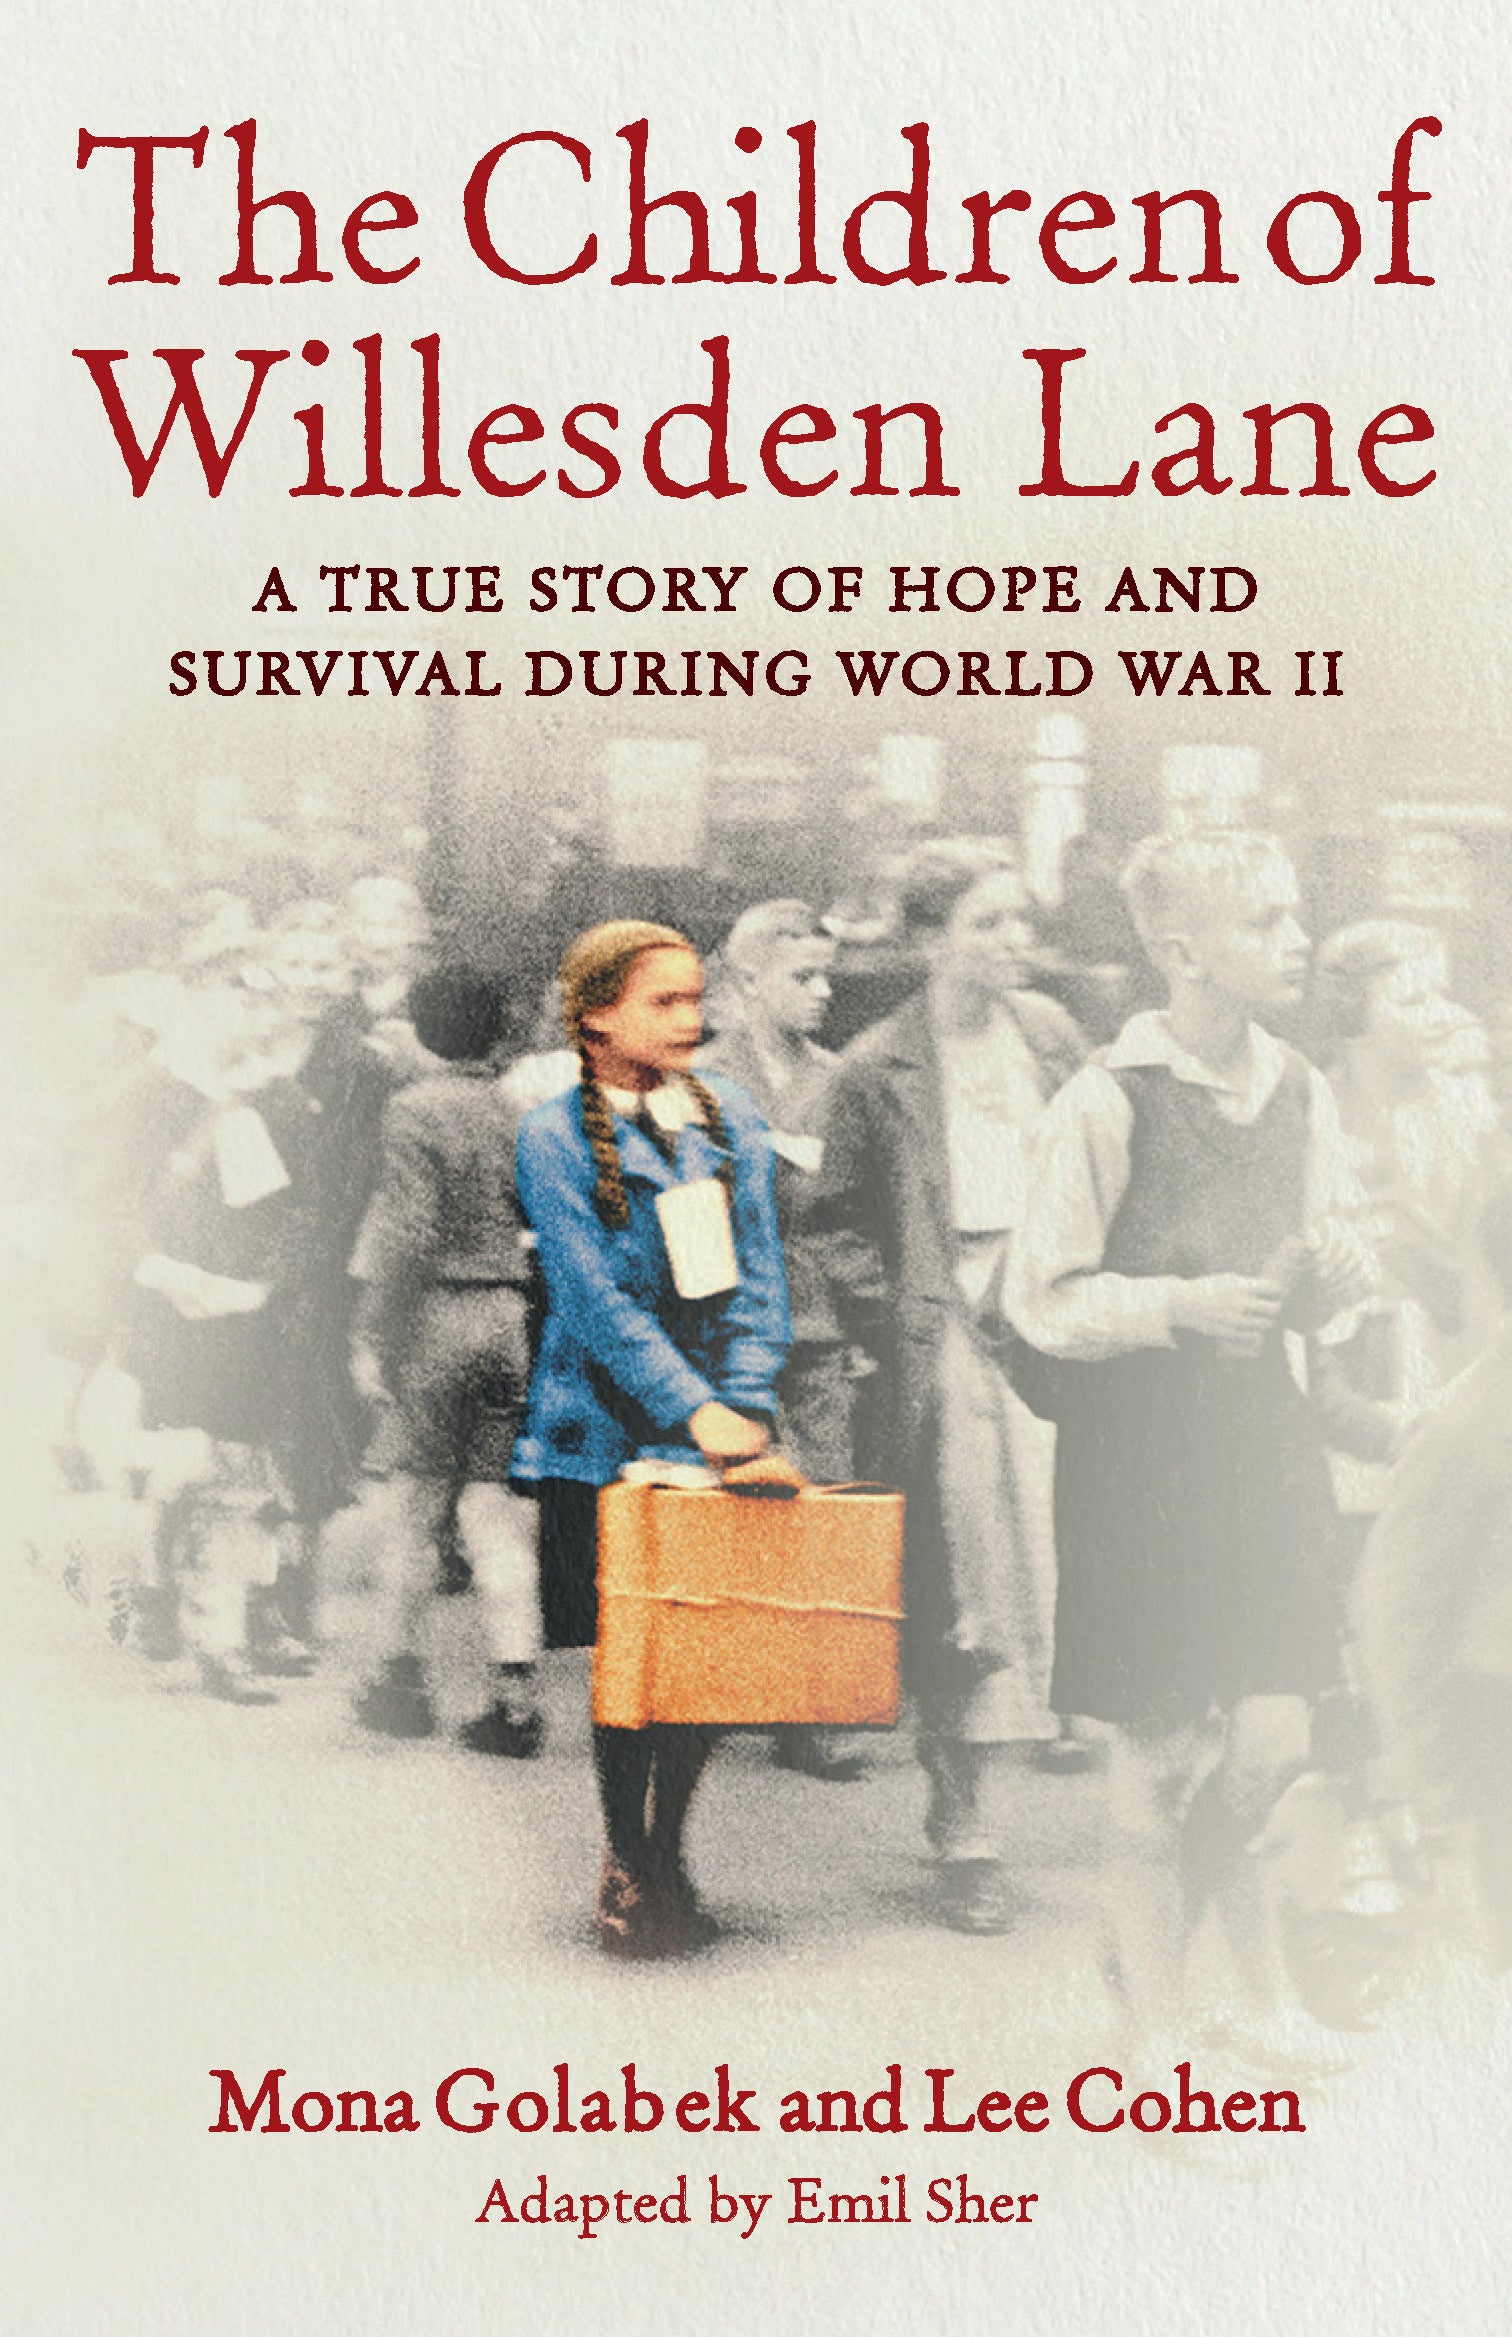 The Children of Willesden Lane: A True Story of Hope and Survival During World War II